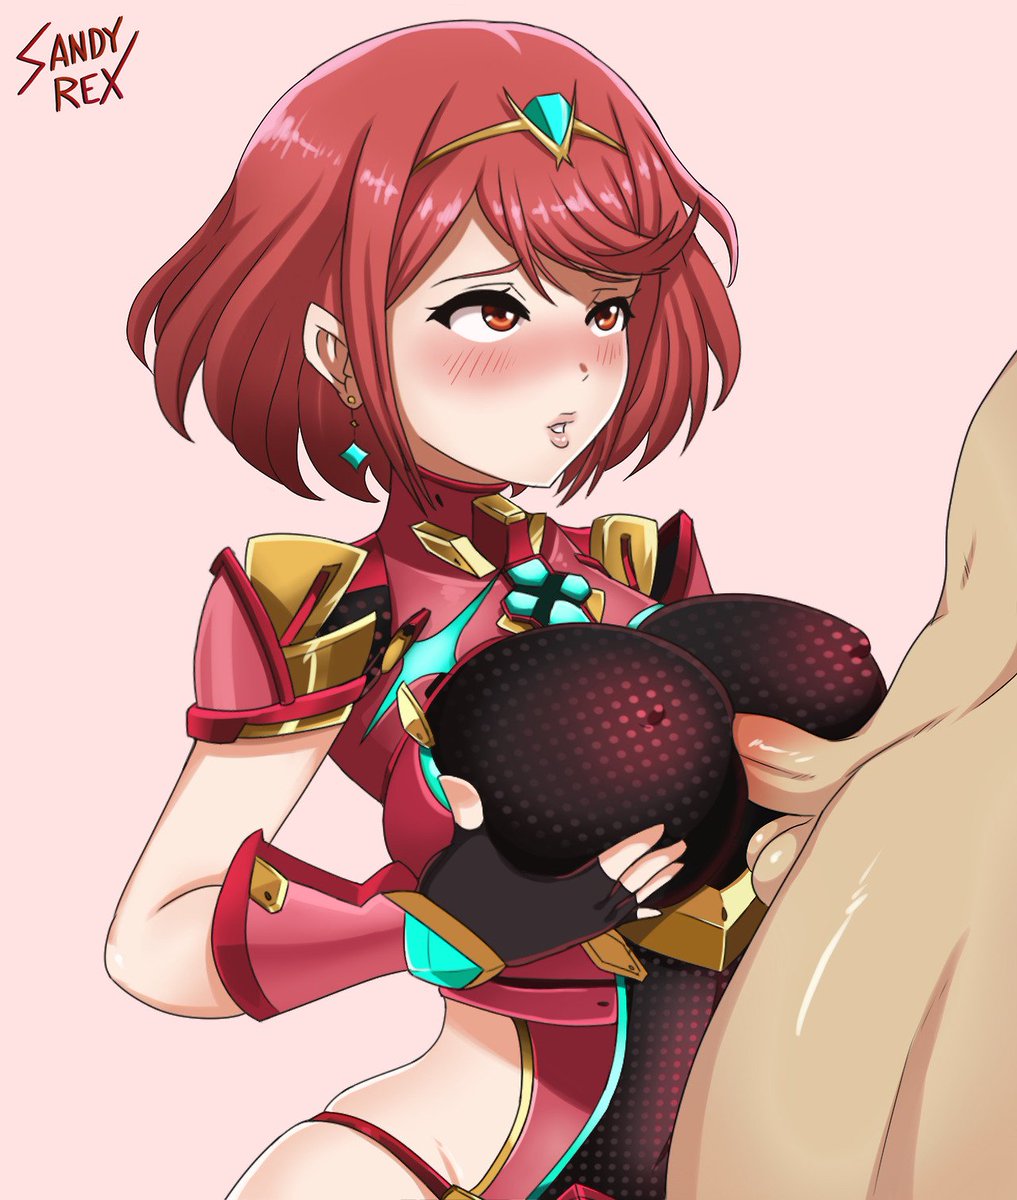 Fairly recent pic: Pyra from Xenoblade Chronicles 2 tiddyfucking someone.